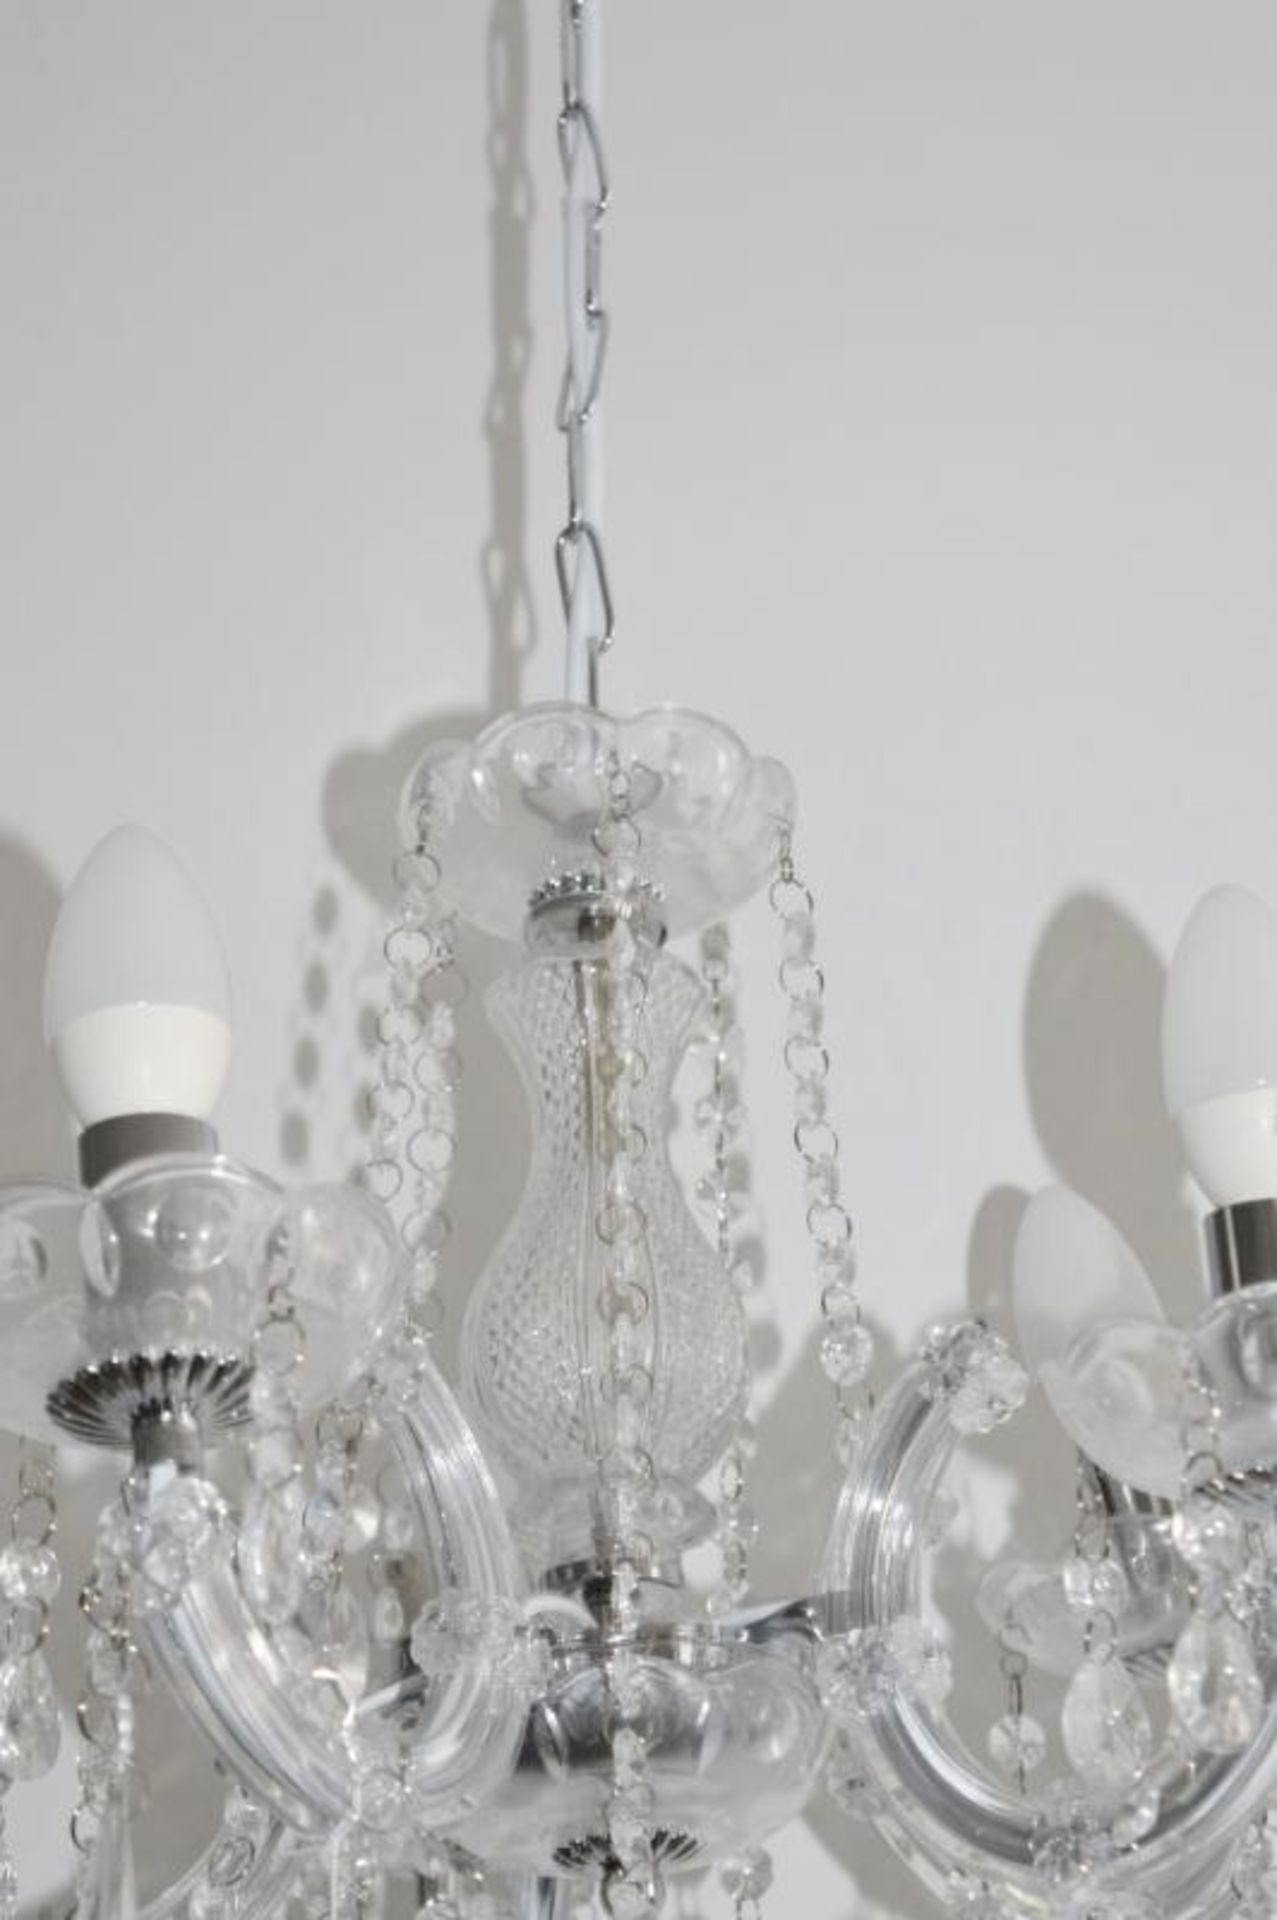 1 x MARIE THERESE Chrome 5 Light Chandelier With Crystal Drops - Ex Display Stock - CL298 - Ref: J13 - Image 3 of 4